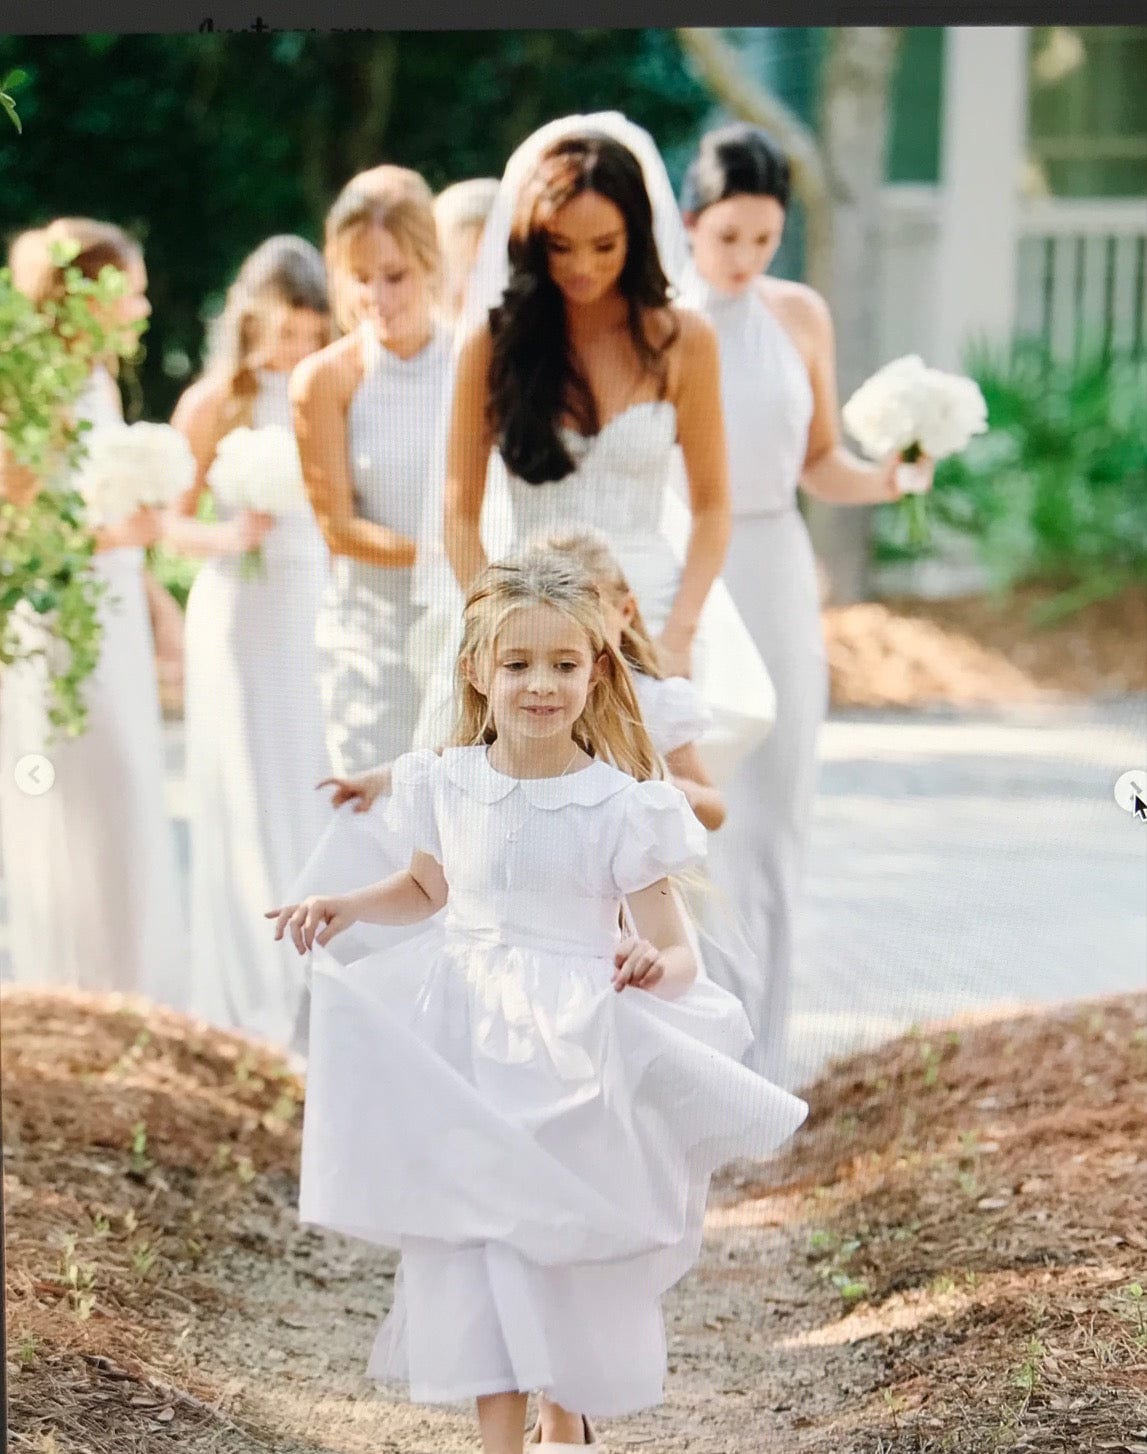 First communion dresses | Mia Bambina Boutique - First holy communion dress  for the Eucharist – First communion dress, communion dresses, dresses,  child,veil, quality, skirt, outfit, shoes, price, sleeveless dresses, first  communion